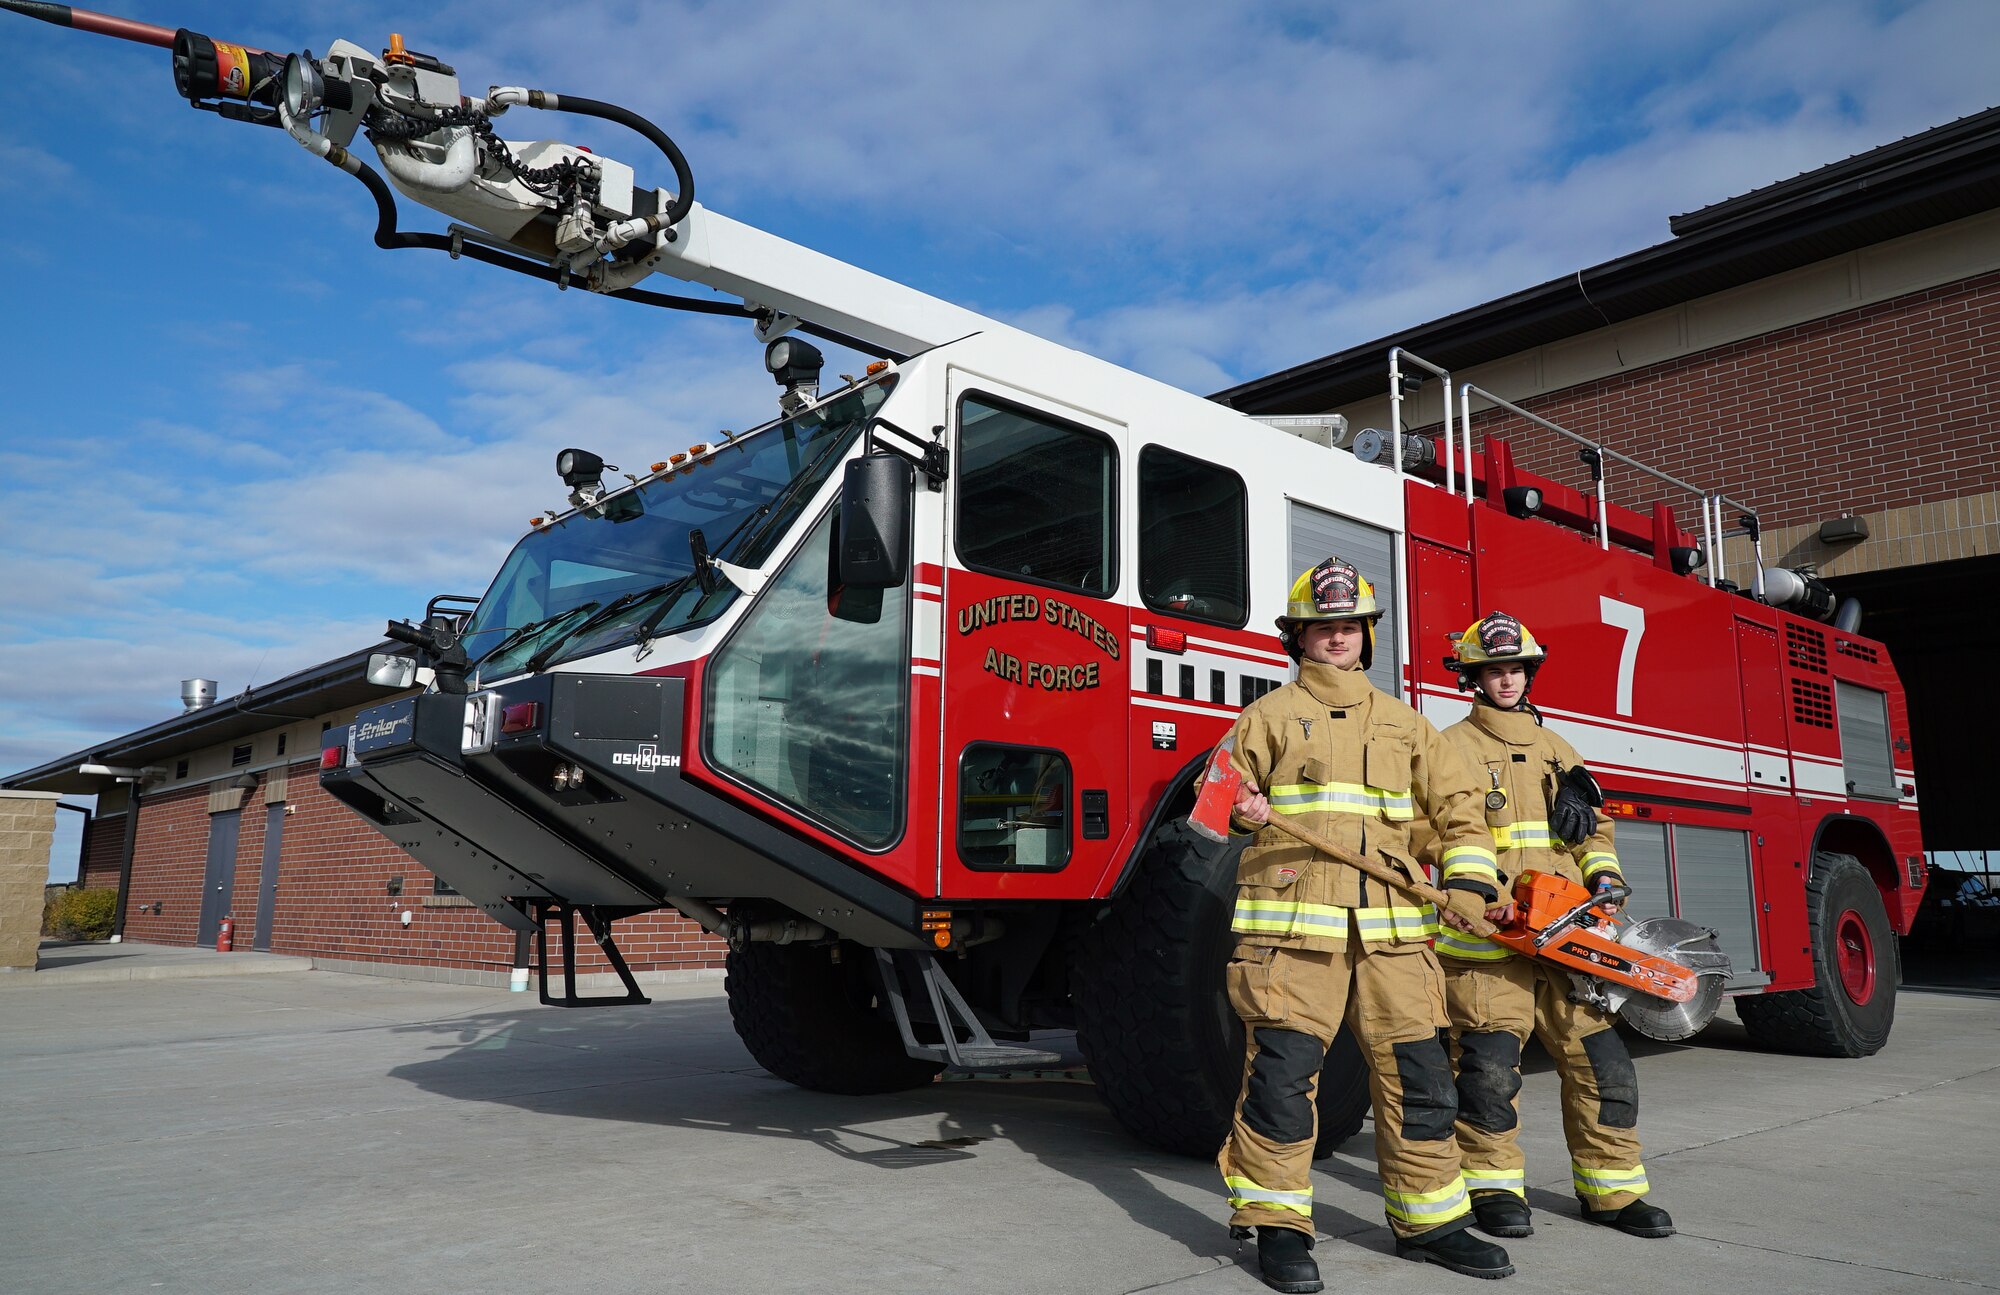 Firefighters with the 319th Civil Engineer Squadron, Airman 1st Class Hunter Garibay, left, and Airman 1st Class Sydney King, pose for a photo on National First Responders Day, Oct. 28, 2019, on Grand Forks Air Force Base, North Dakota. Garibay and King, new firefighters in the Air Force, expressed their drive to learn more and prepare themselves as potential heroes in a crisis situation. (U.S. Air Force photo by Senior Airman Elora J. Martinez)